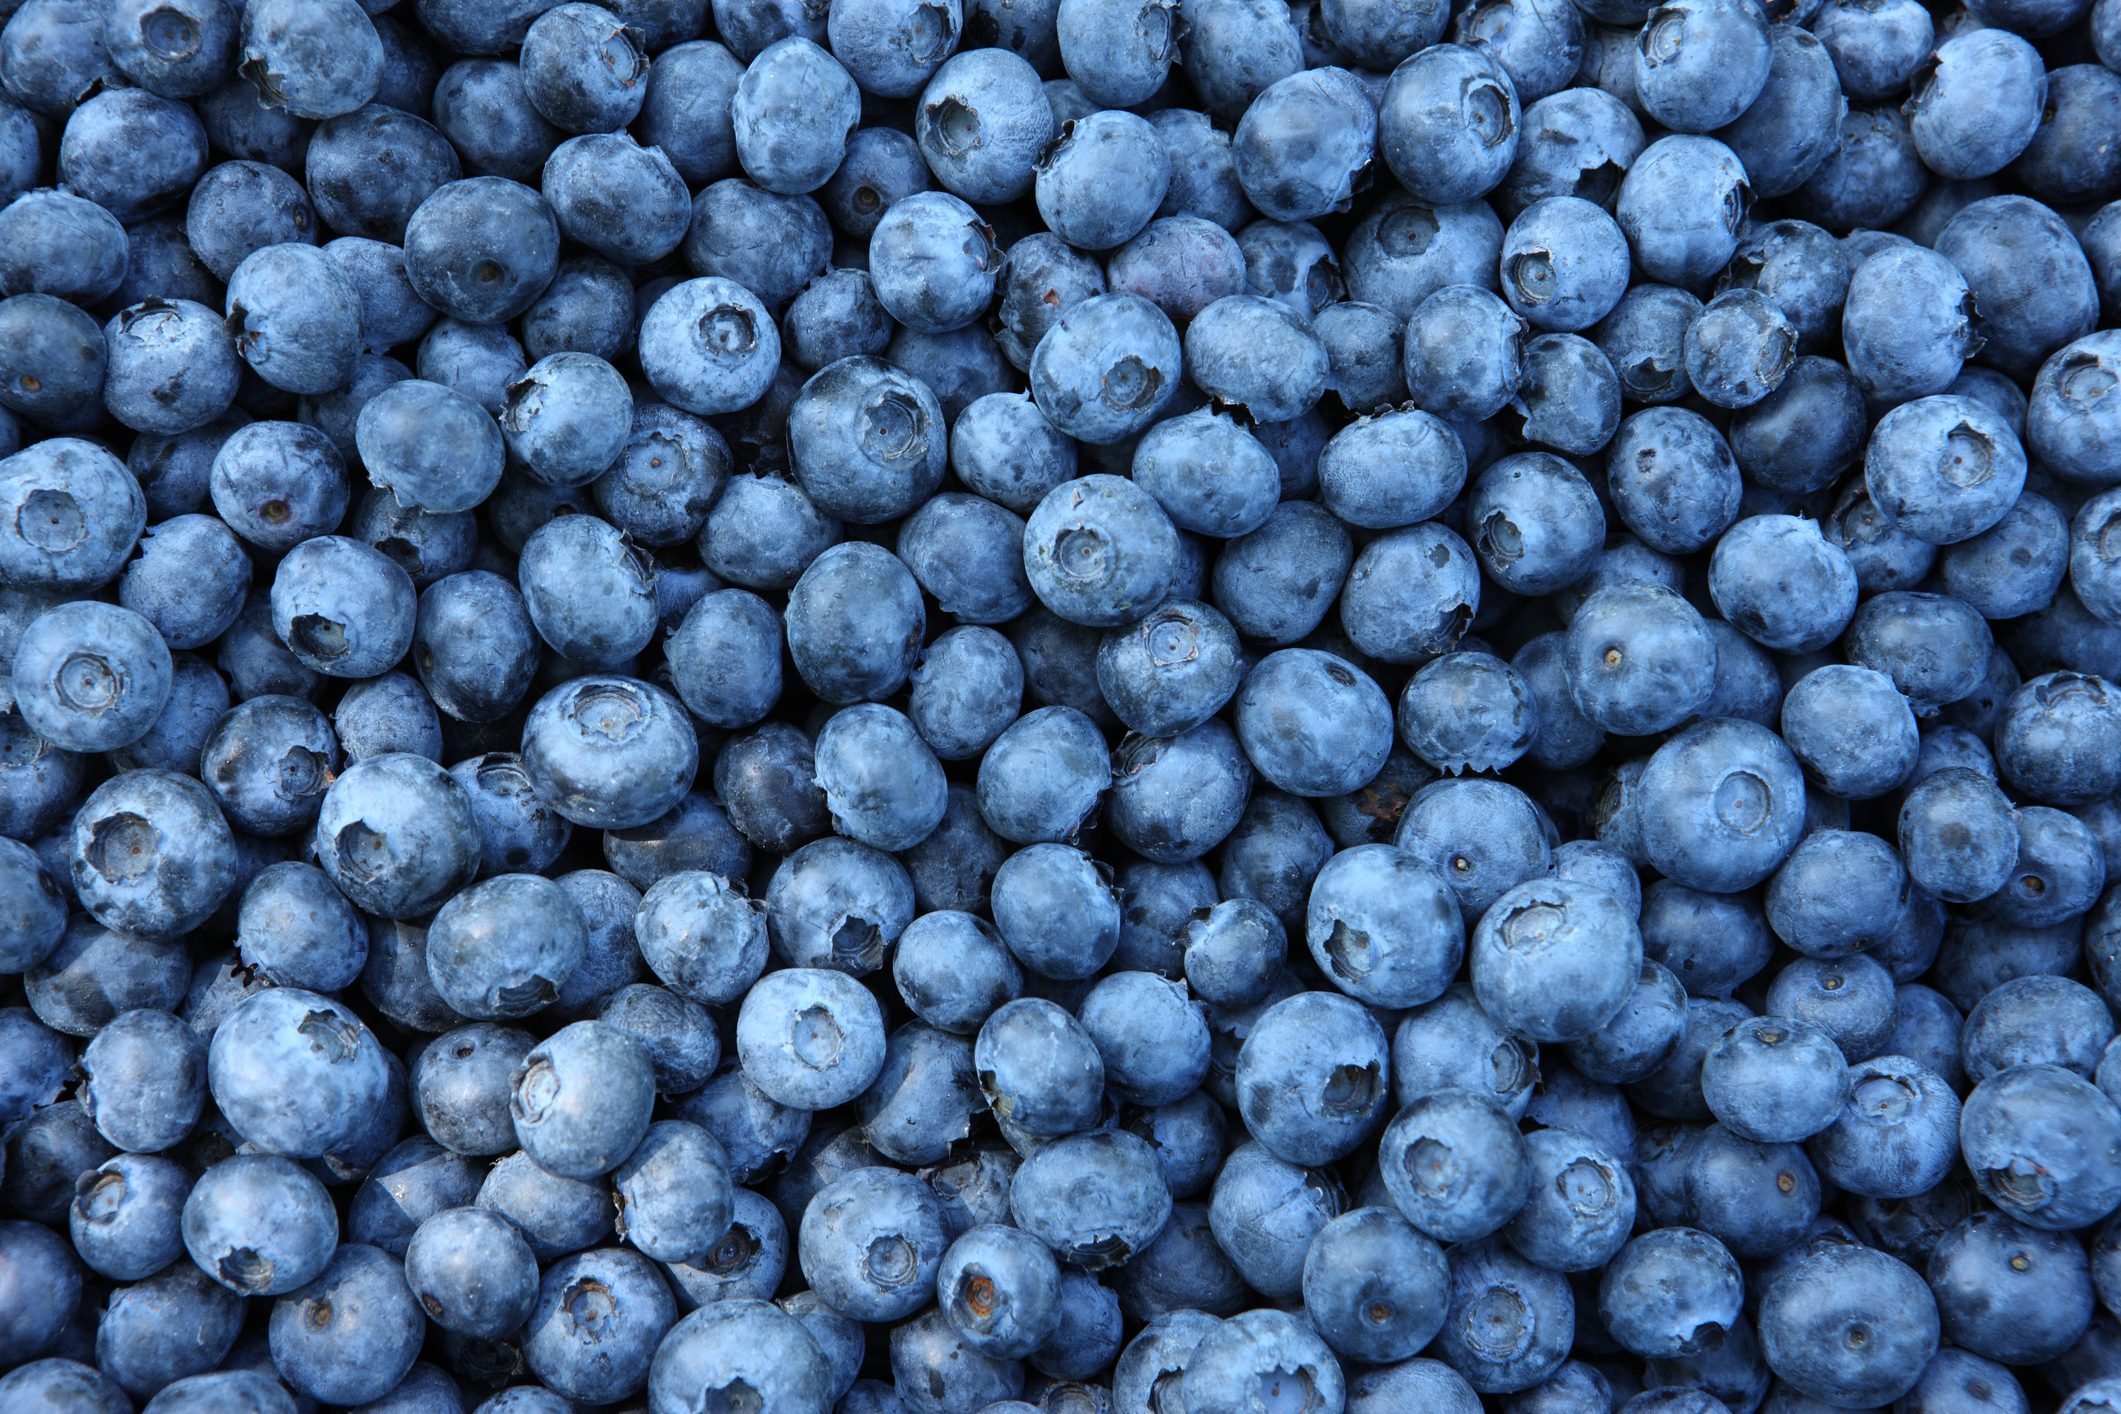 I Ate Blueberries Every Day for a Week—Here's What Happened